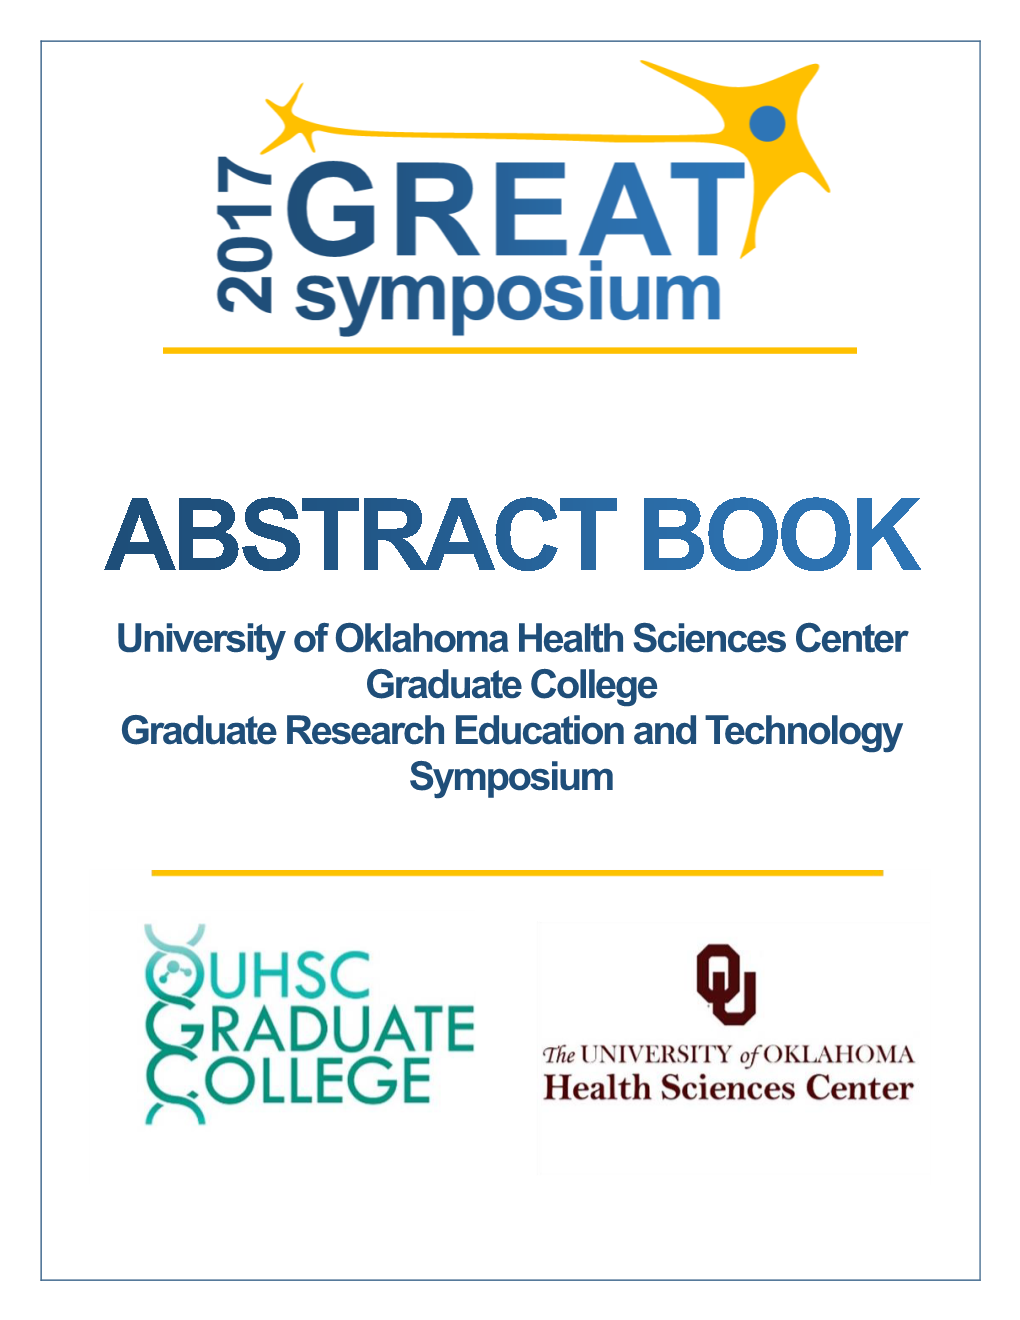 University of Oklahoma Health Sciences Center Graduate College Graduate Research Education and Technology Symposium